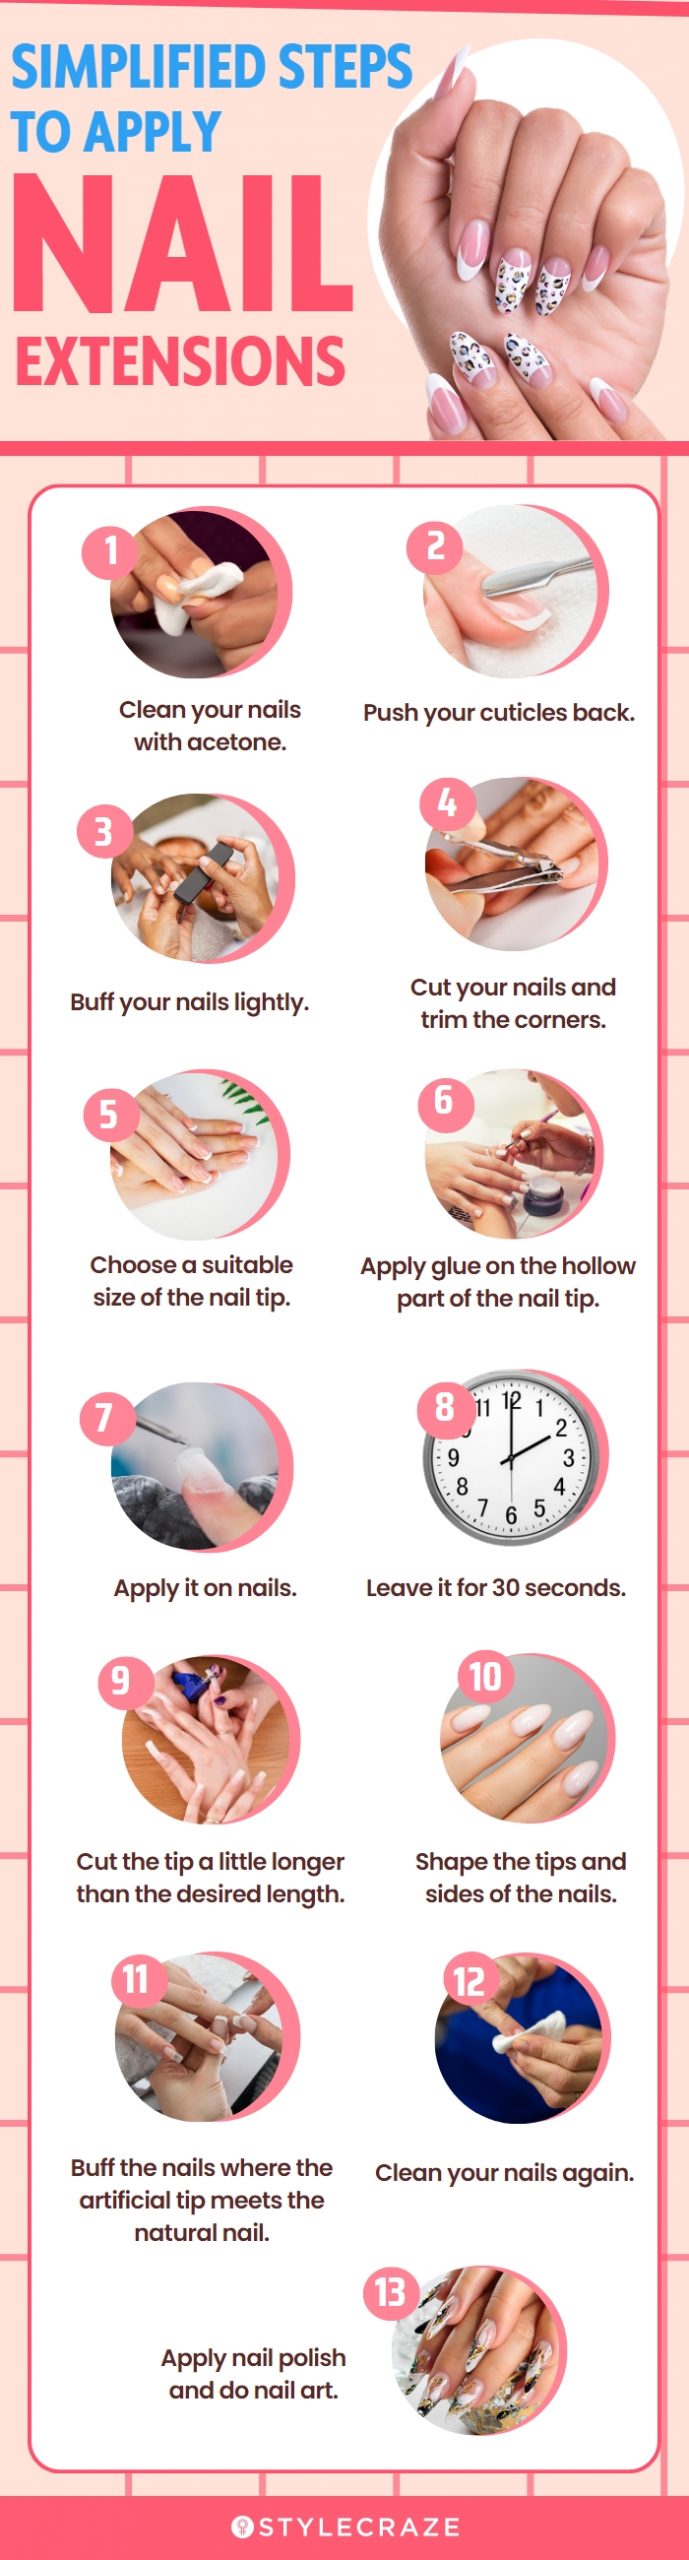 simplified steps to apply nail extension [infographic]